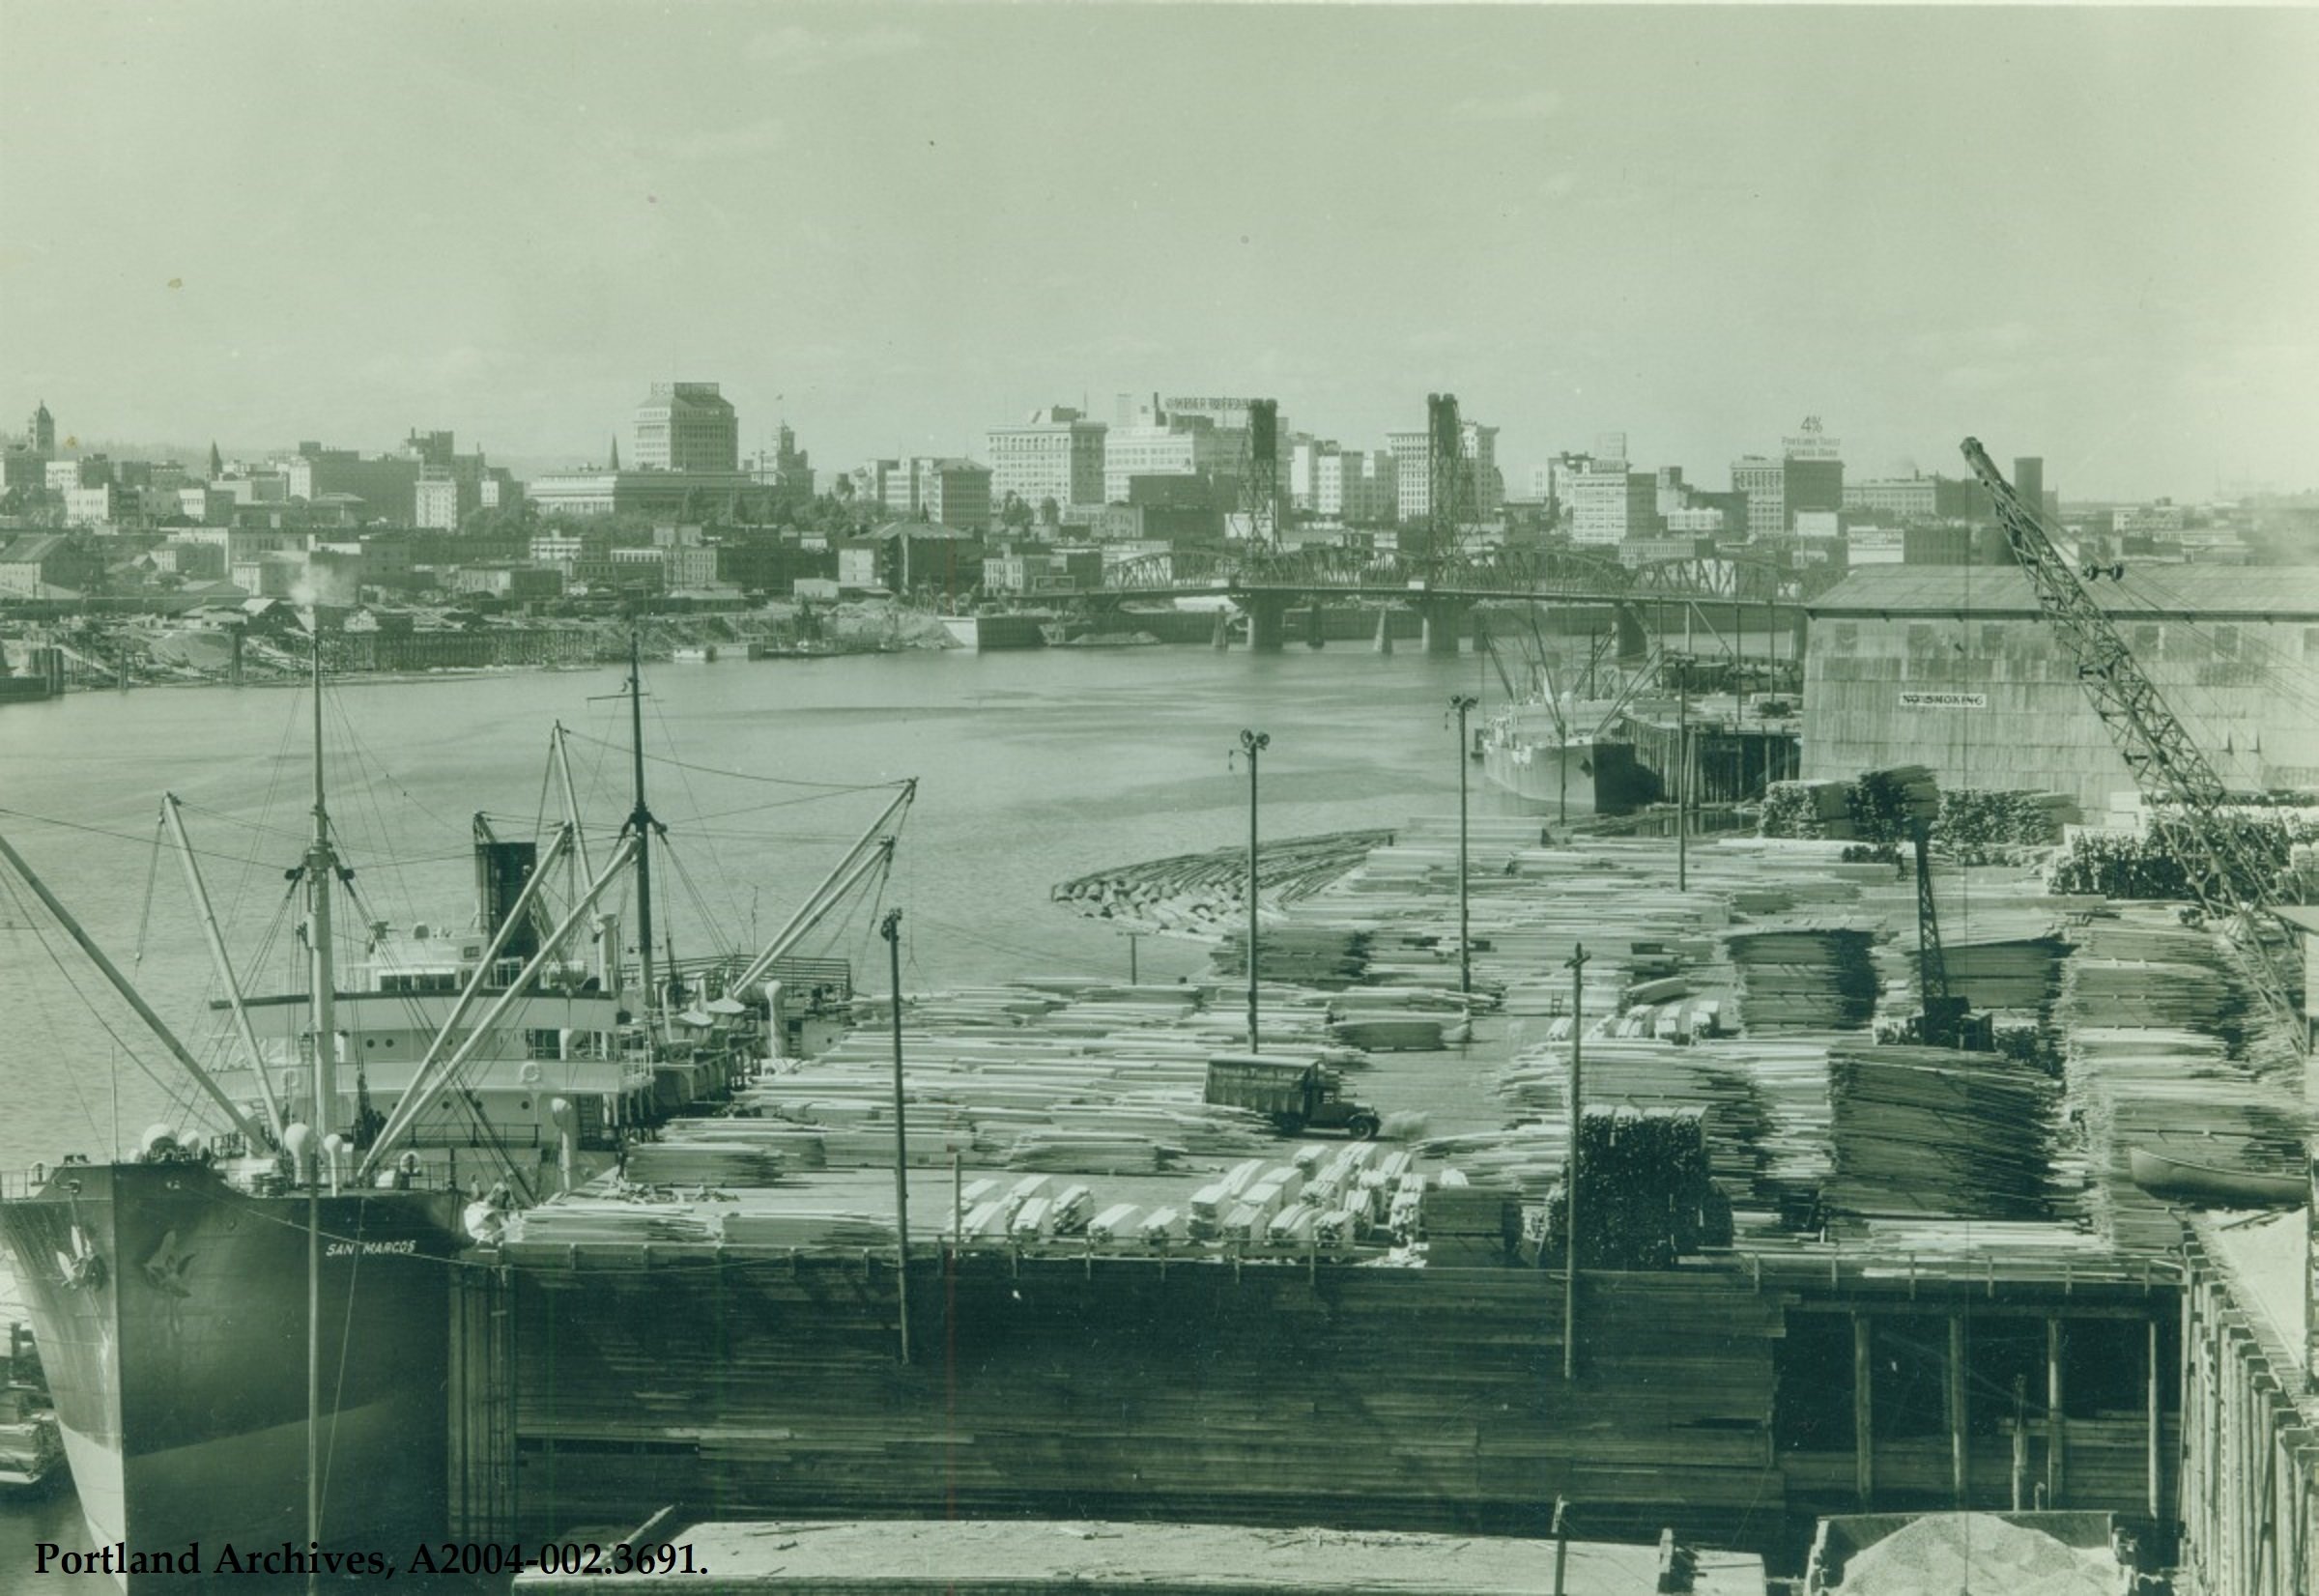 1 - Lumber - Auditor s Historical Records - Inman - Poulsen Lumber dock and view of downtown Portland 1937.JPG